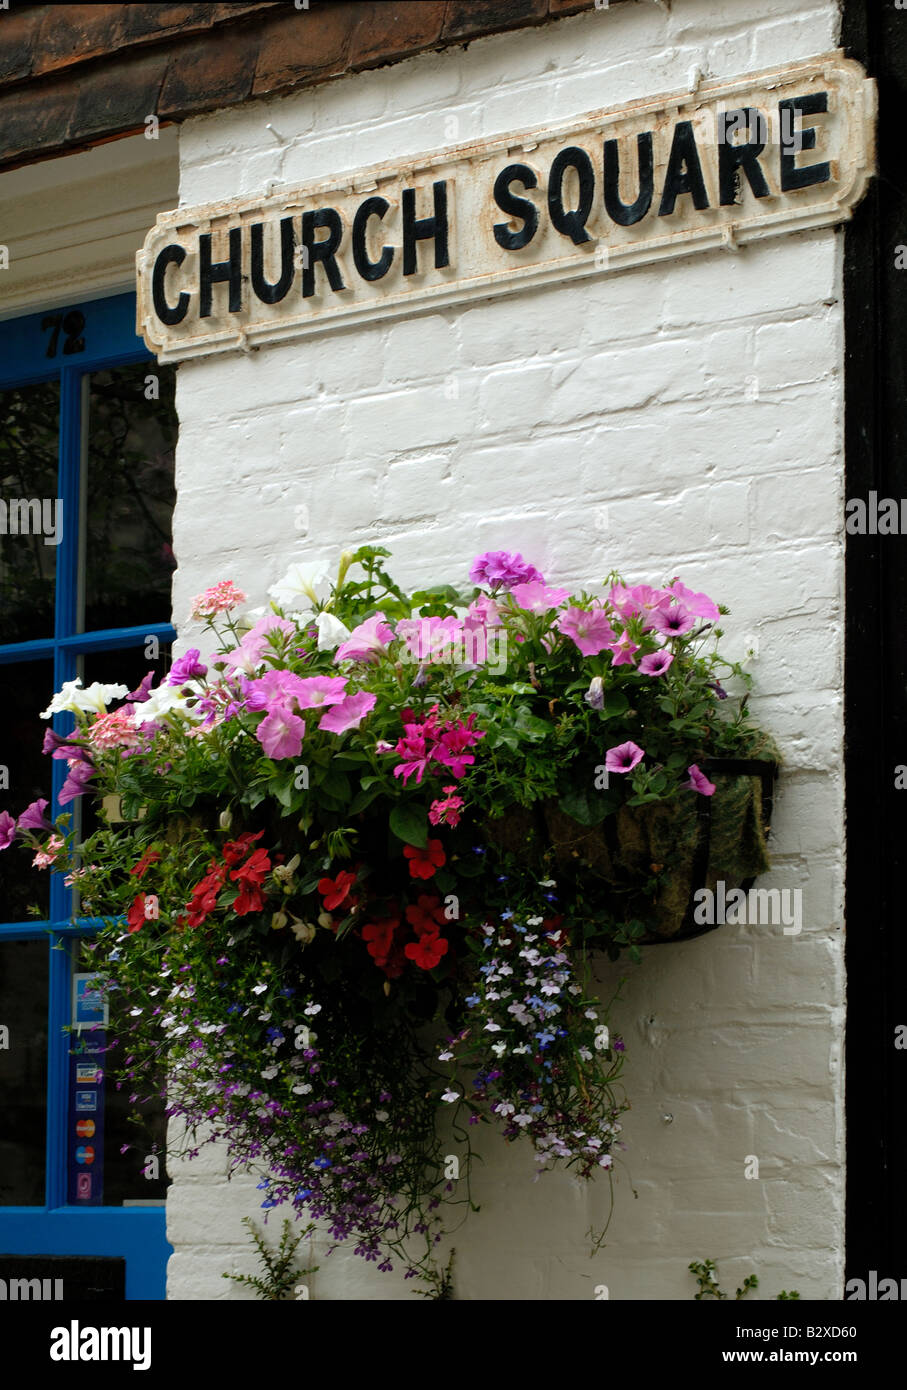 Church Square street sign, Rye, East Sussex Stock Photo